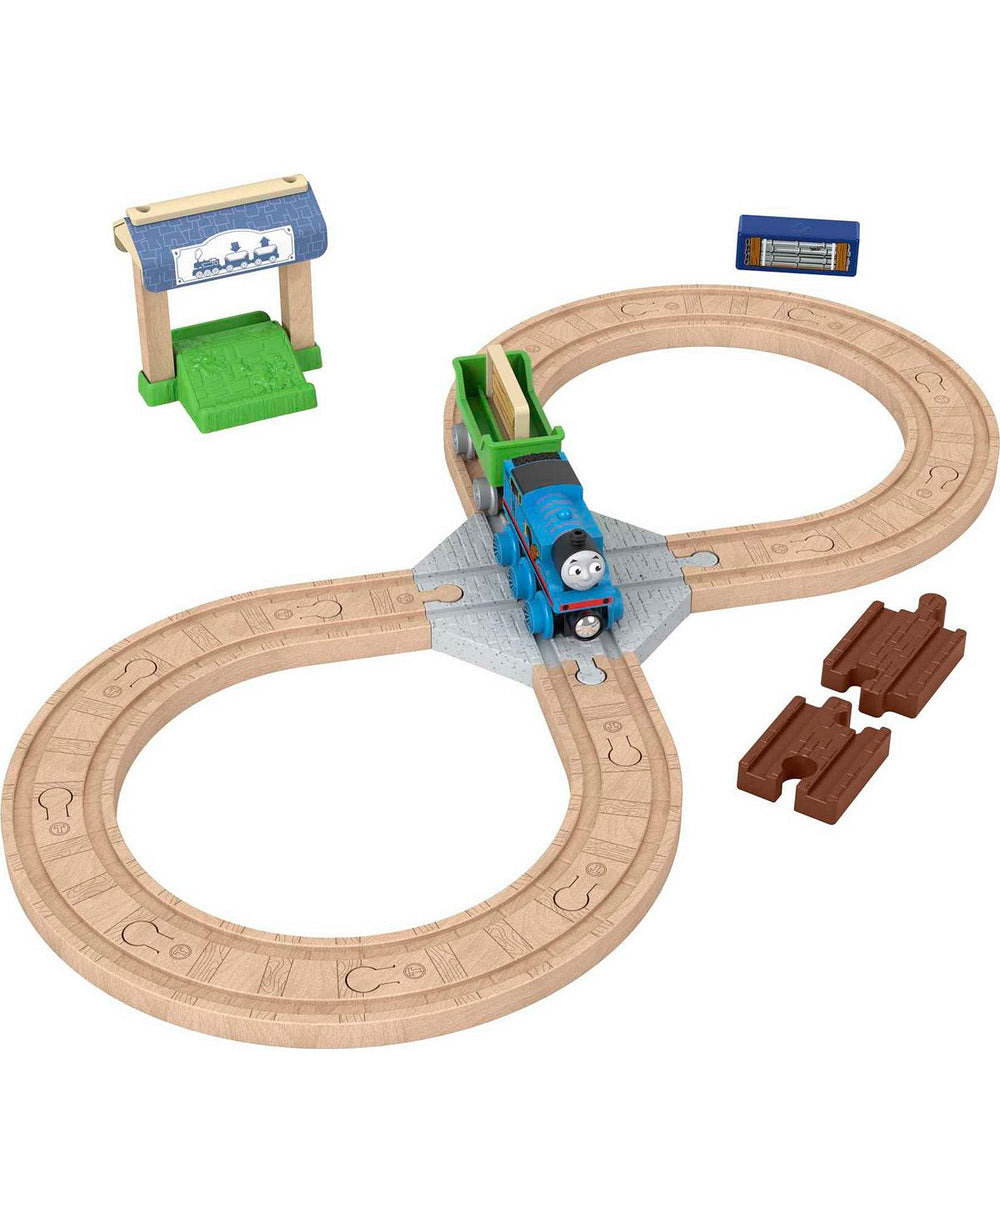 Fisher-Price Thomas & Friends Wooden Railway - Figure 8 Expansion Track Pack